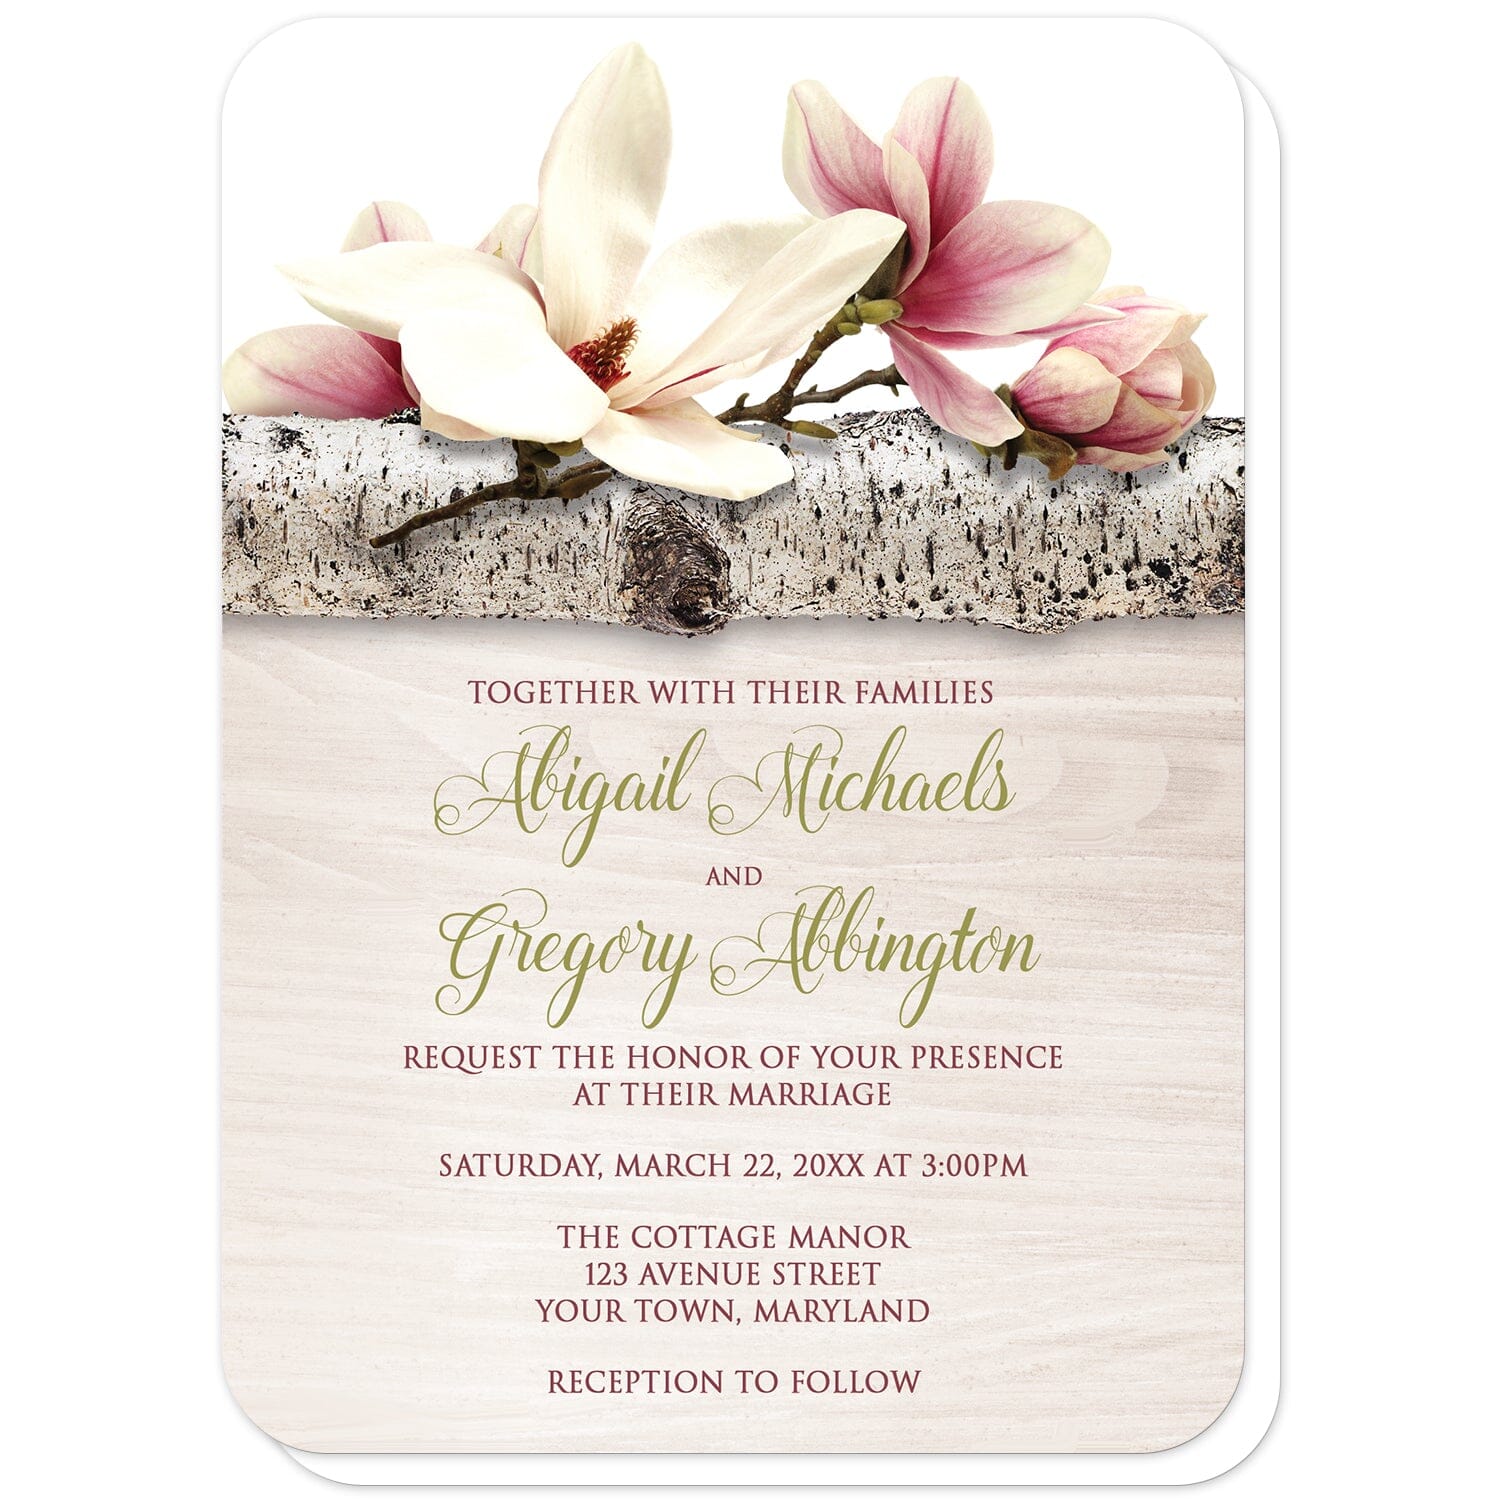 Magnolia Birch Light Wood Floral Wedding Invitations (with rounded corners) at Artistically Invited. Beautiful magnolia birch light wood floral wedding invitations with pink and white magnolia flowers laying on a birch tree branch along the top. Your personalized marriage celebration details are custom printed in dark pink and light olive green over a light wood background illustration.